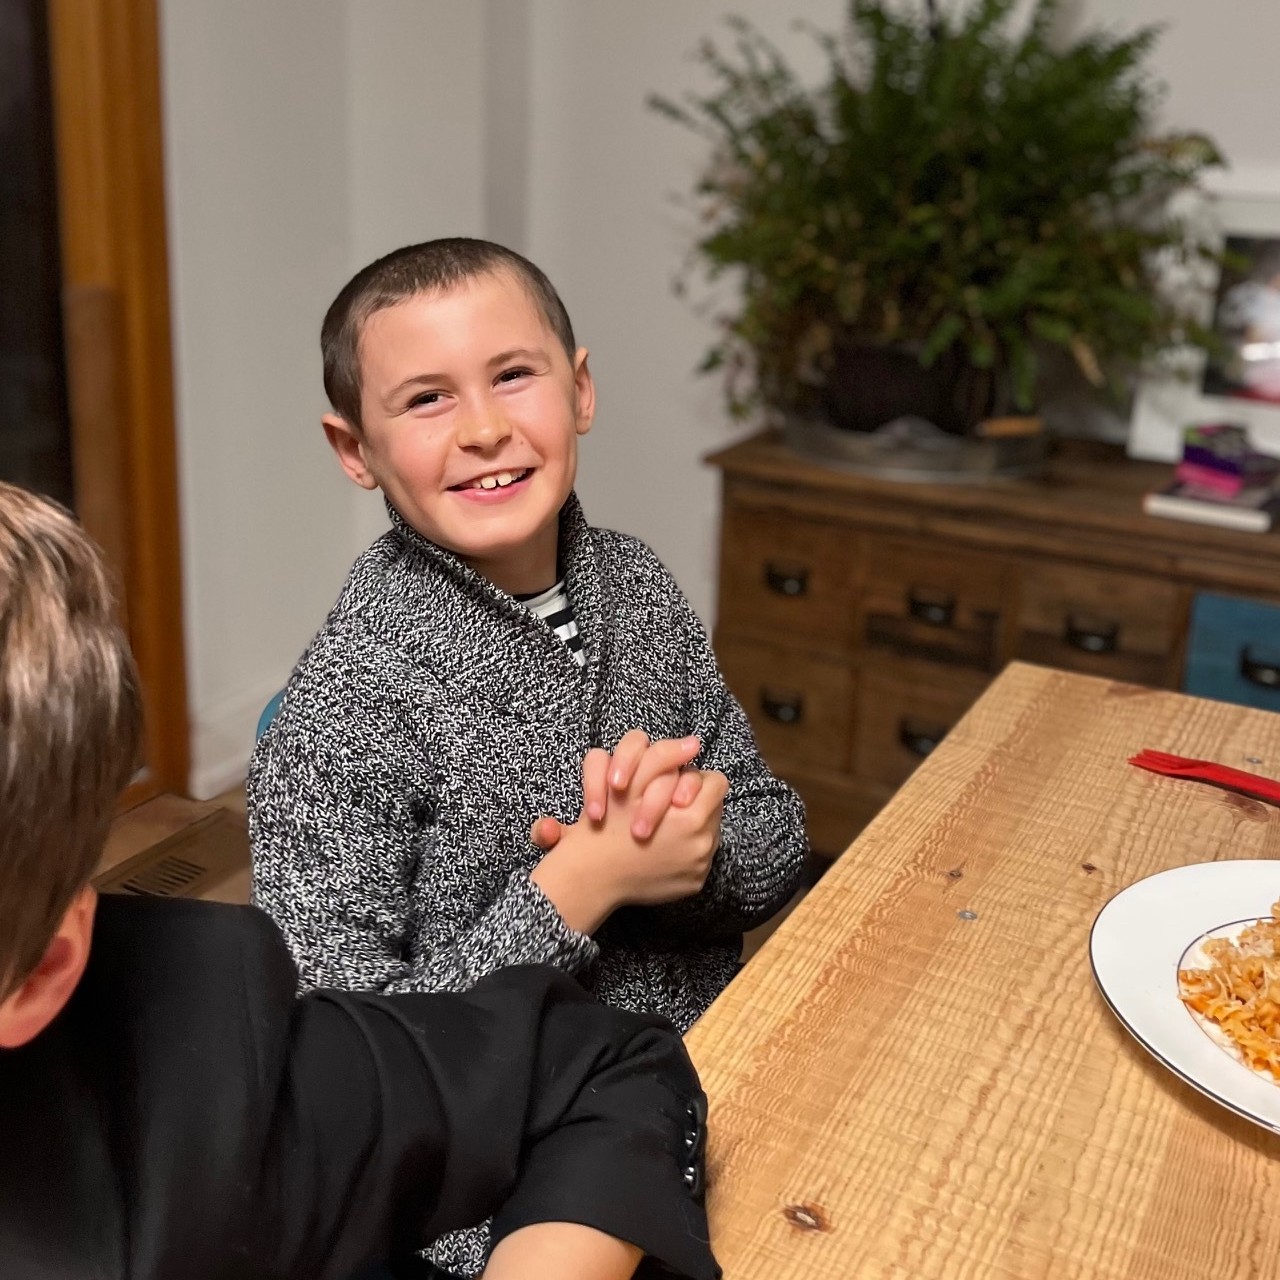 A smiling boy sits at a table with a plate of pasta in front of him.